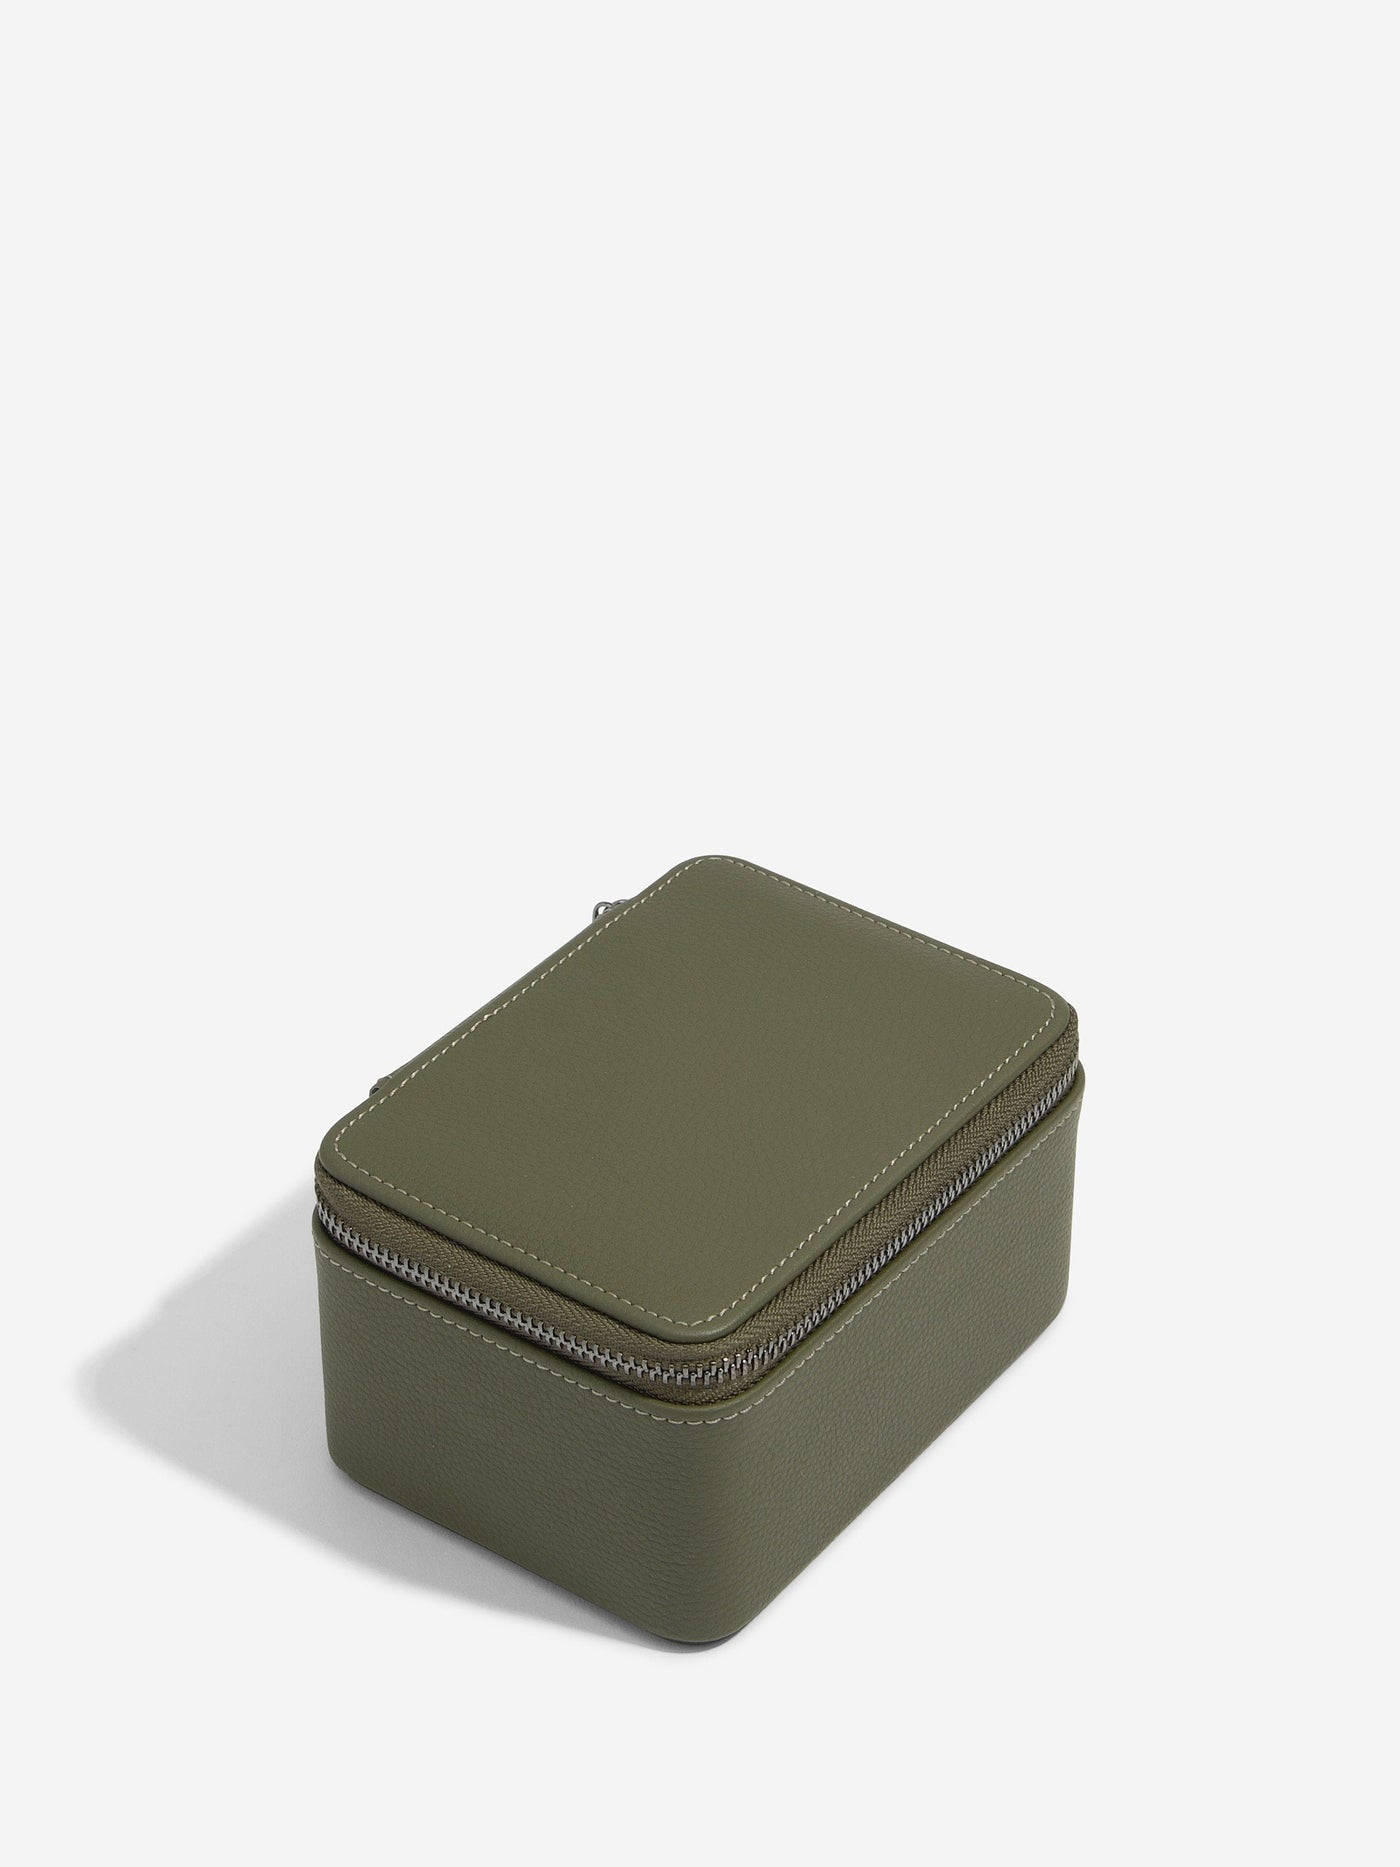 Stackers. Olive Green Pebble Large Zipped Travel Watch Box - timeframedclocks